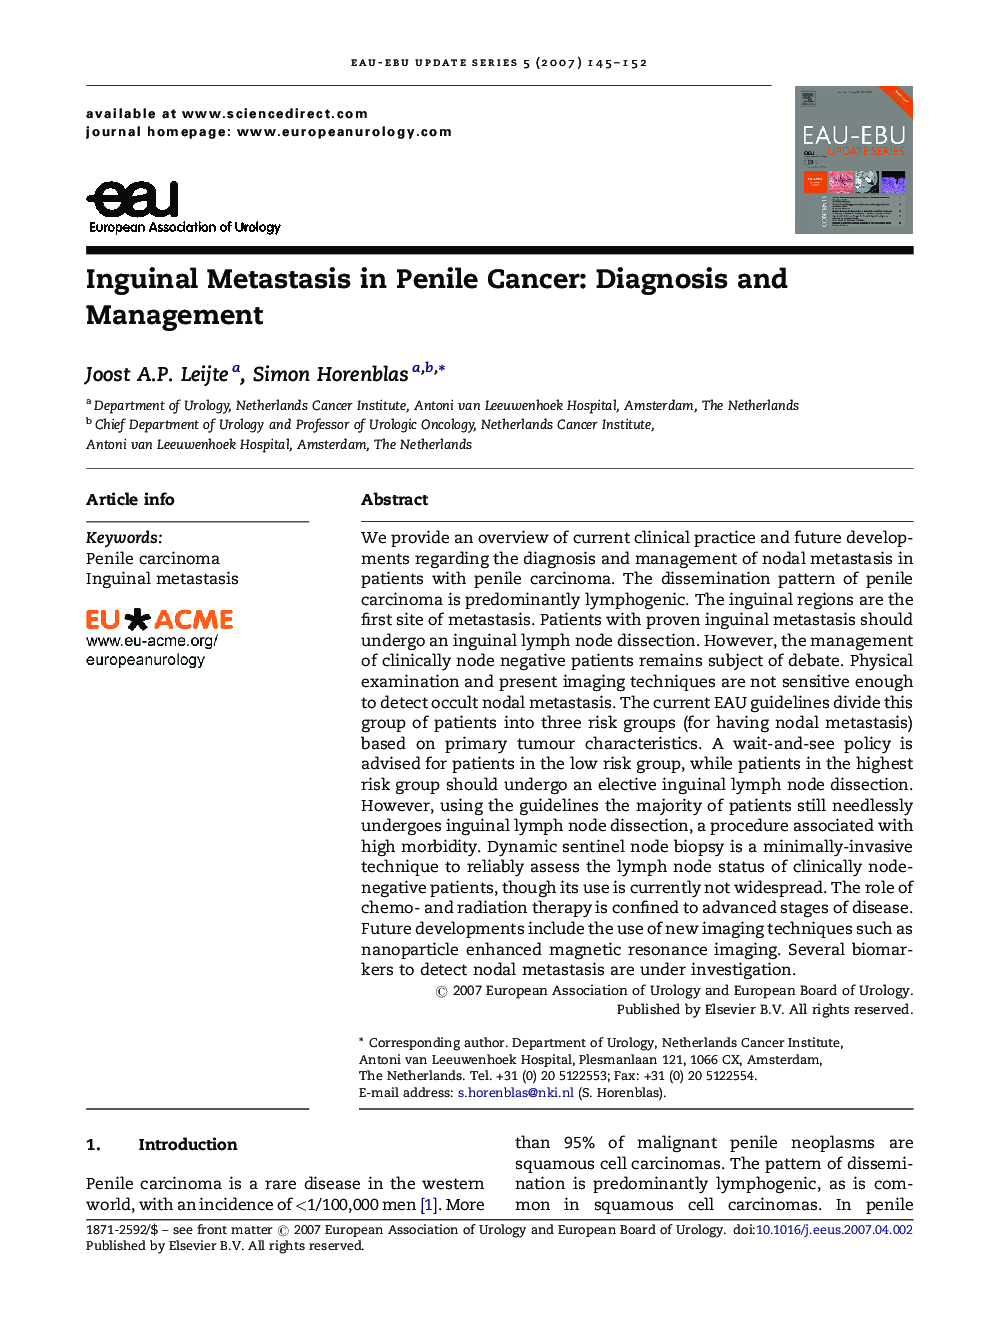 Inguinal Metastasis in Penile Cancer: Diagnosis and Management